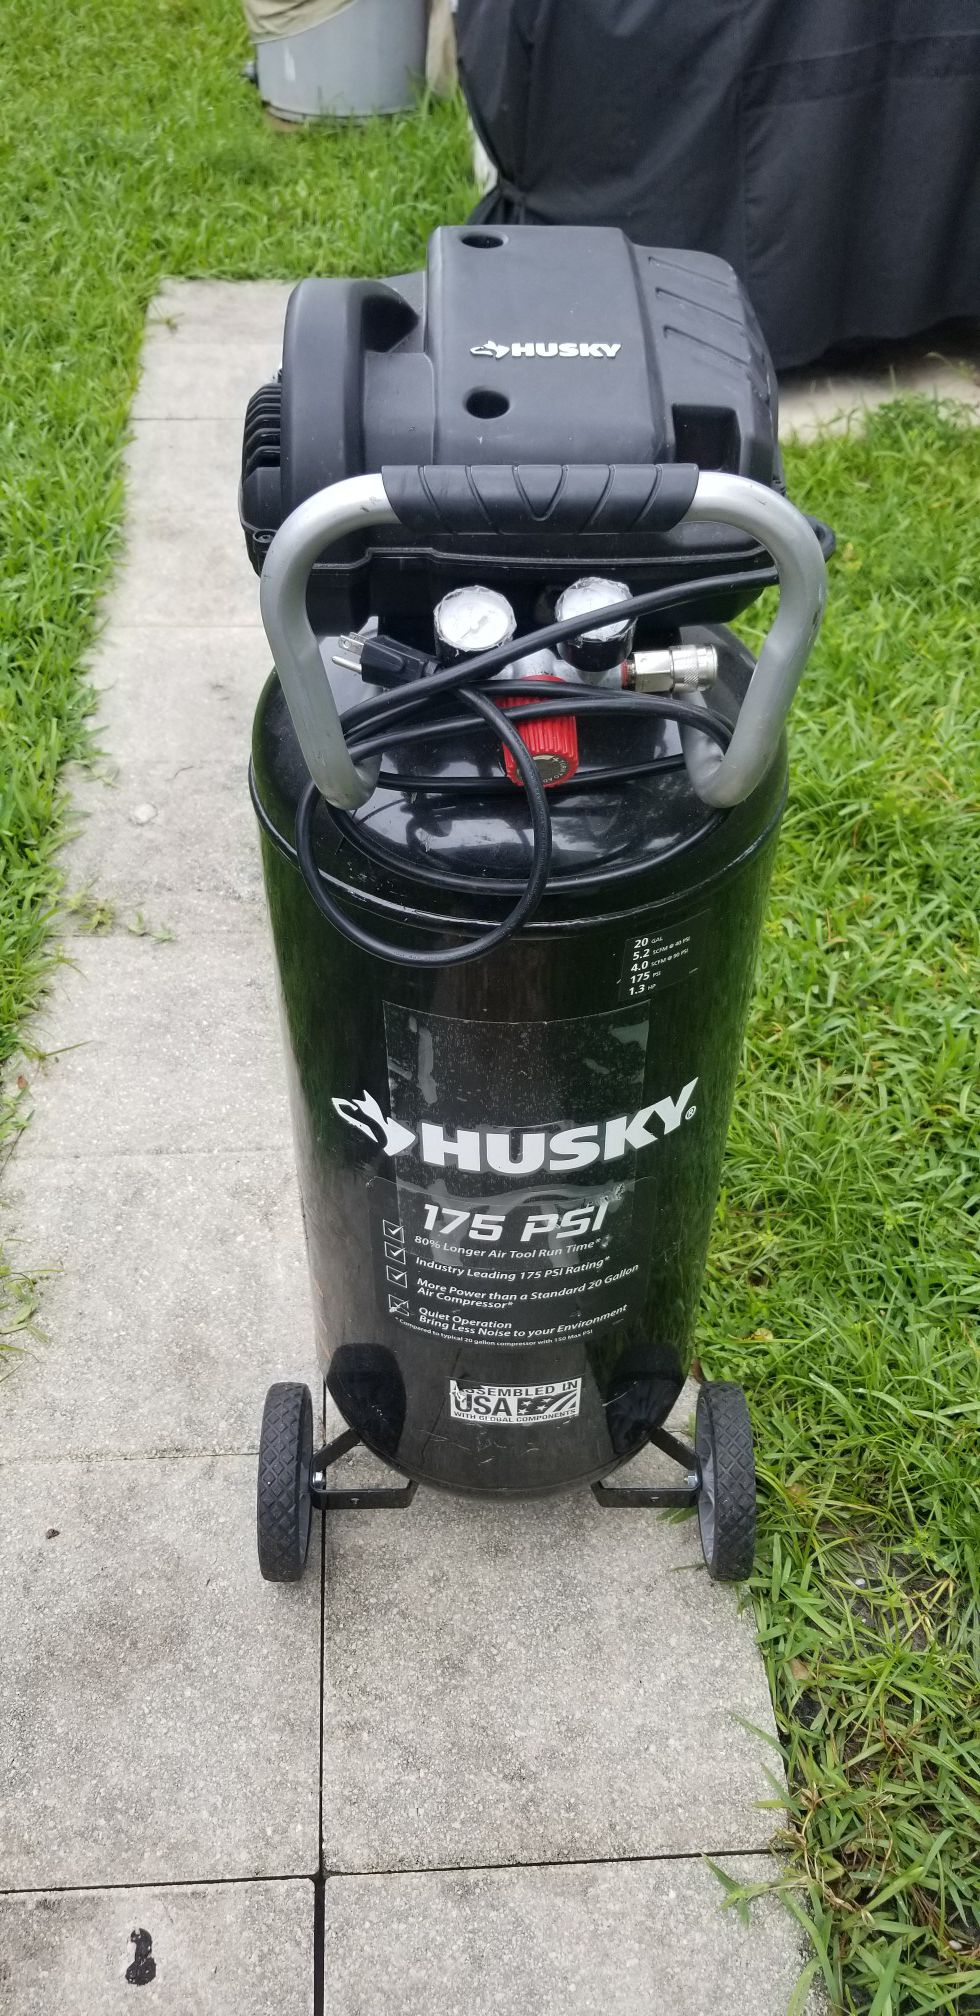 Husky 20 Gallon Ait Compressor if it's still posted it's still available